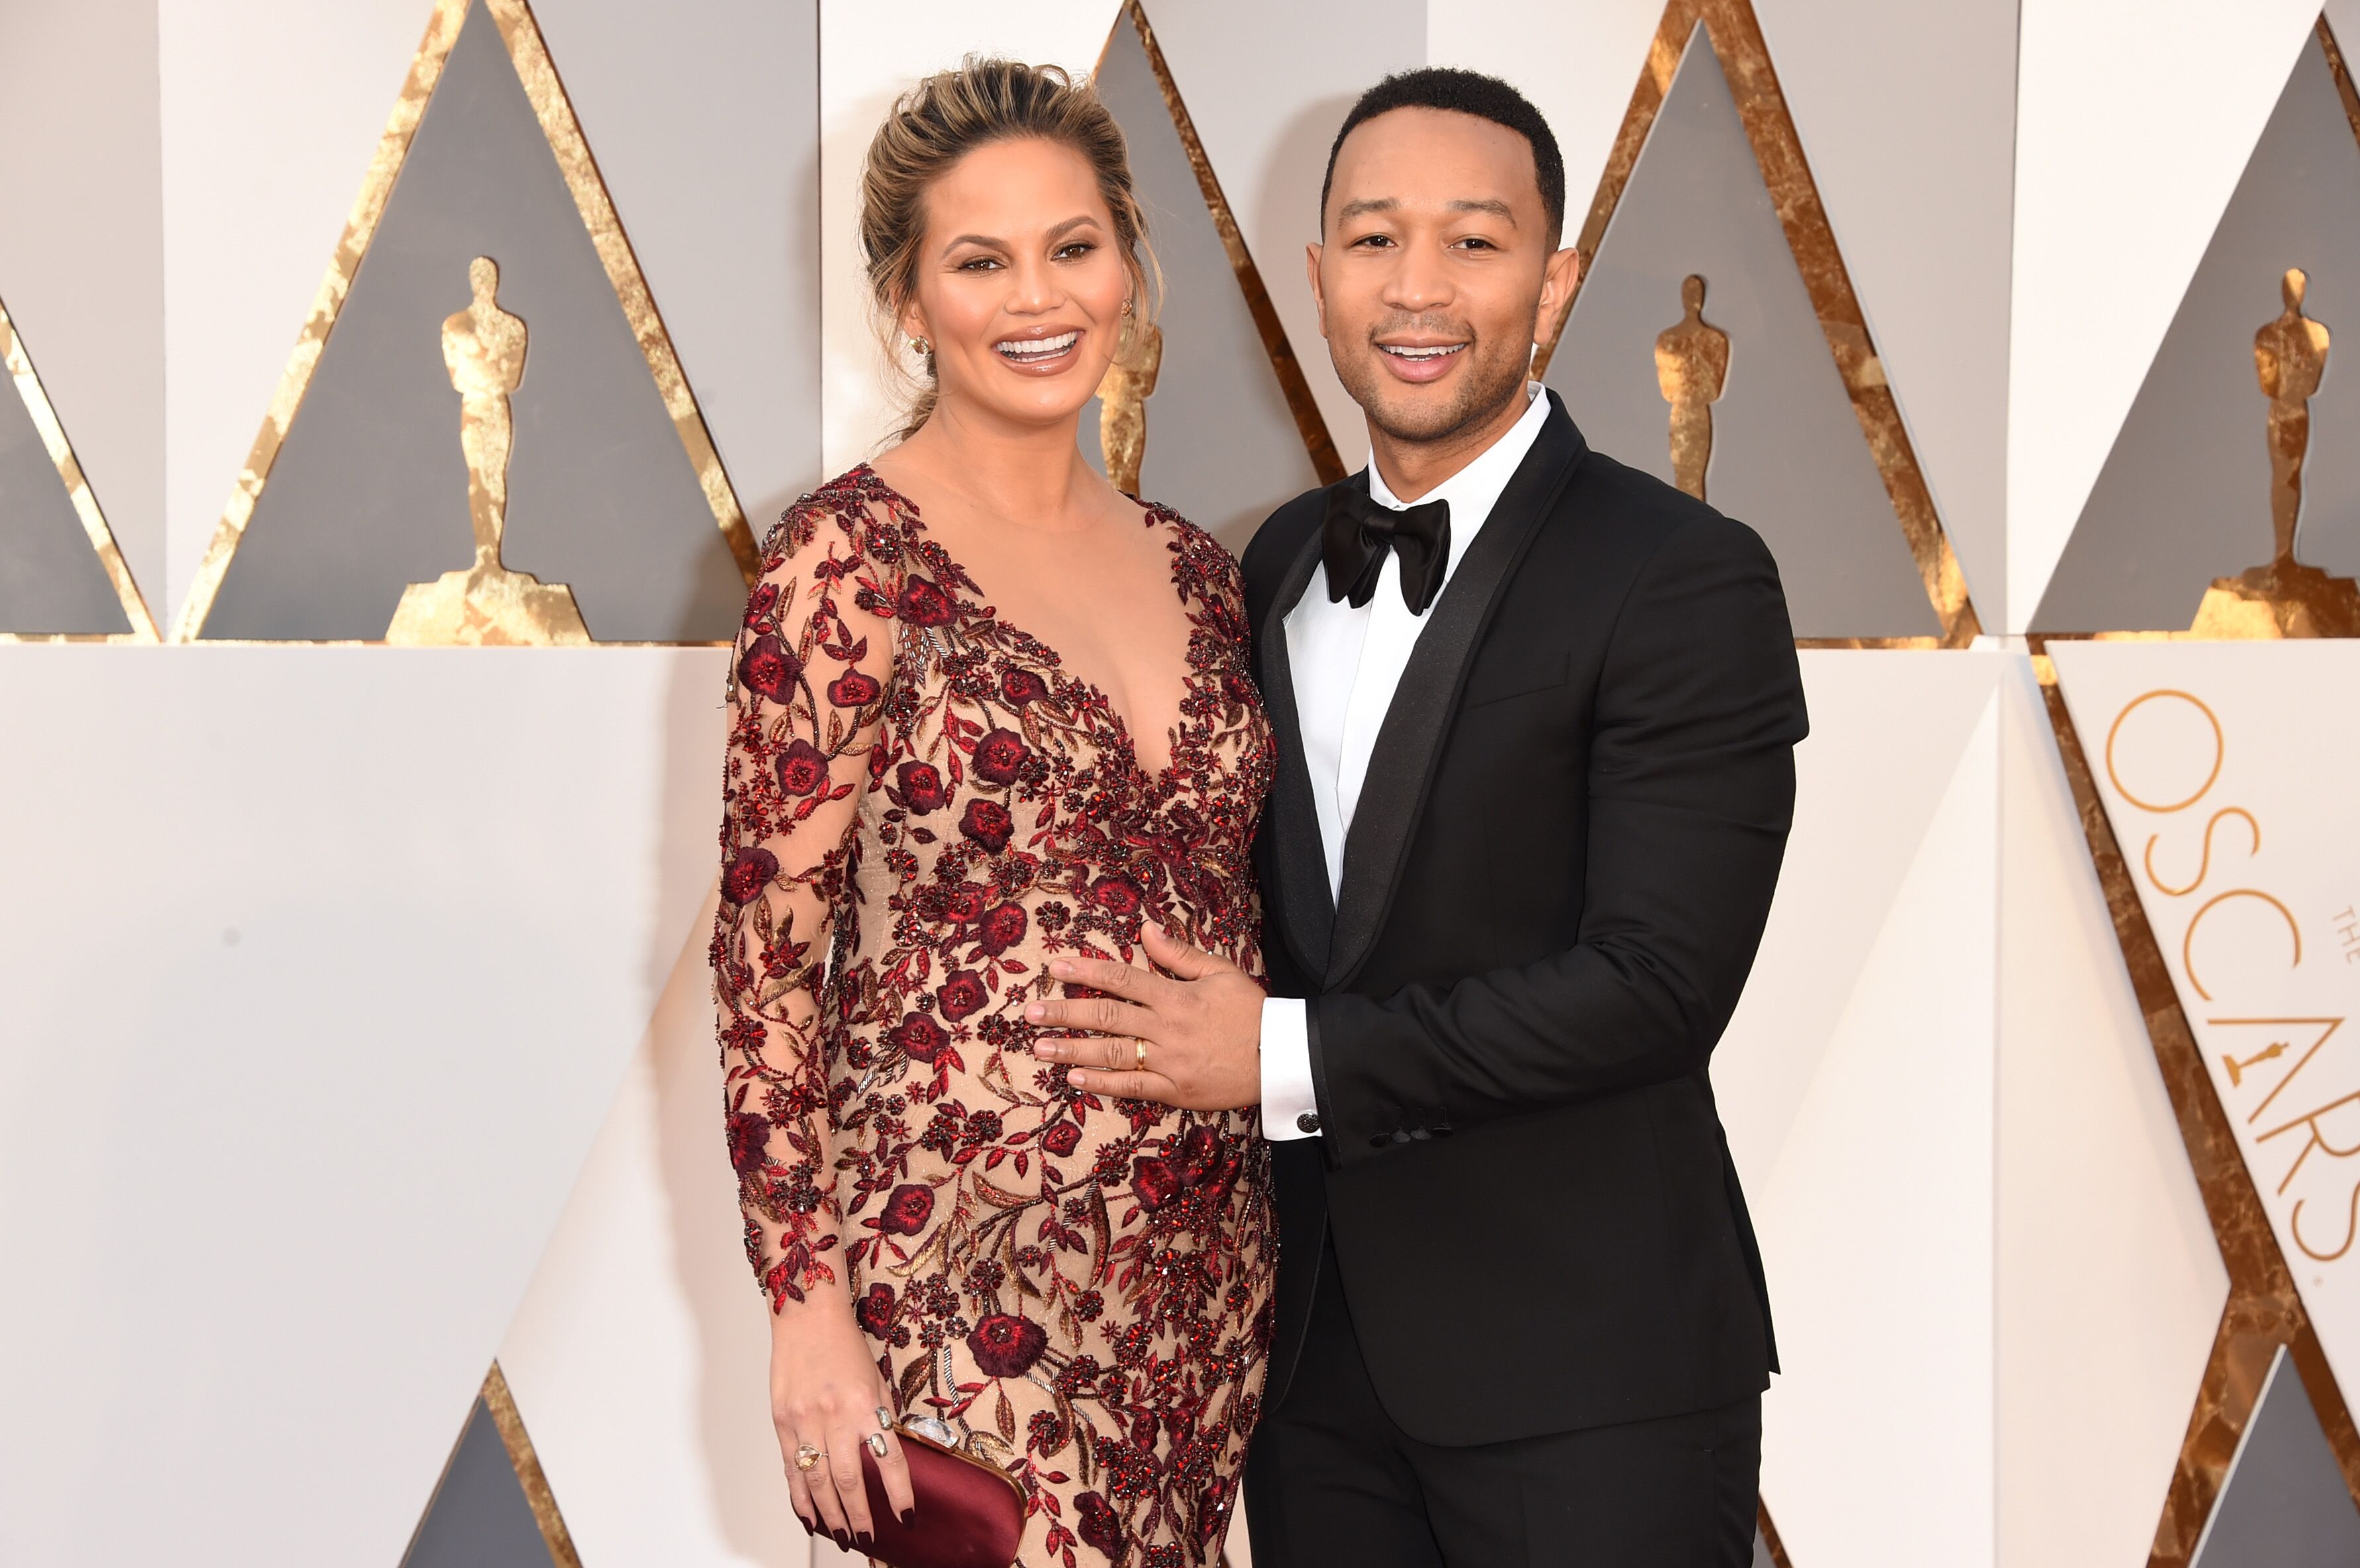 Model Chrissy Teigen (L) and recording artist John Legend attend the 88th Annual Academy Awards at Hollywood & Highland Center on February 28, 2016 in Hollywood, California | Photo: Getty Images